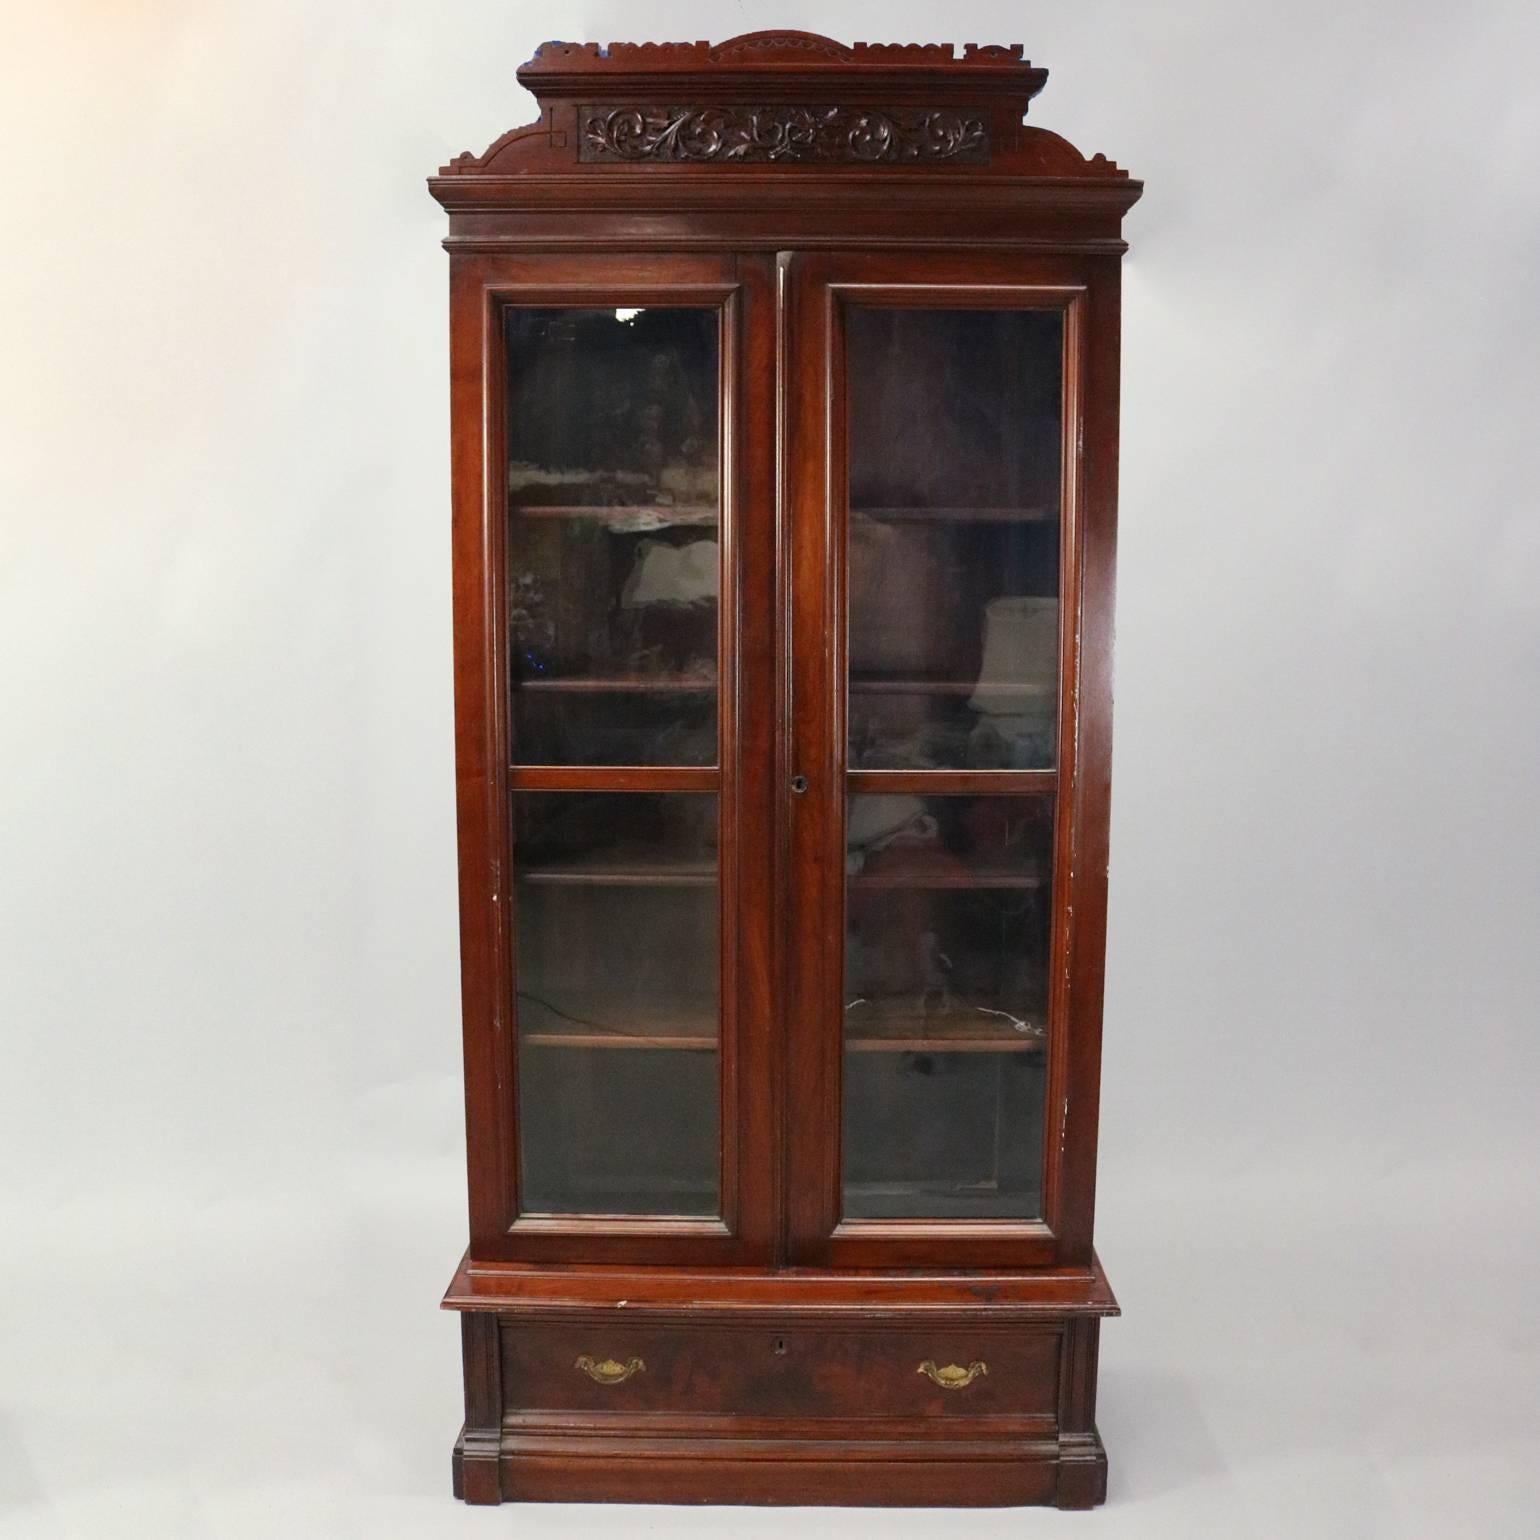 Monumental antique Eastlake walnut library or office bookcase features double glass doors opening to adjustable shelving, lower long drawer, incised and carved foliate acanthus crest, bronze hardware, circa 1880.

Measures: 86